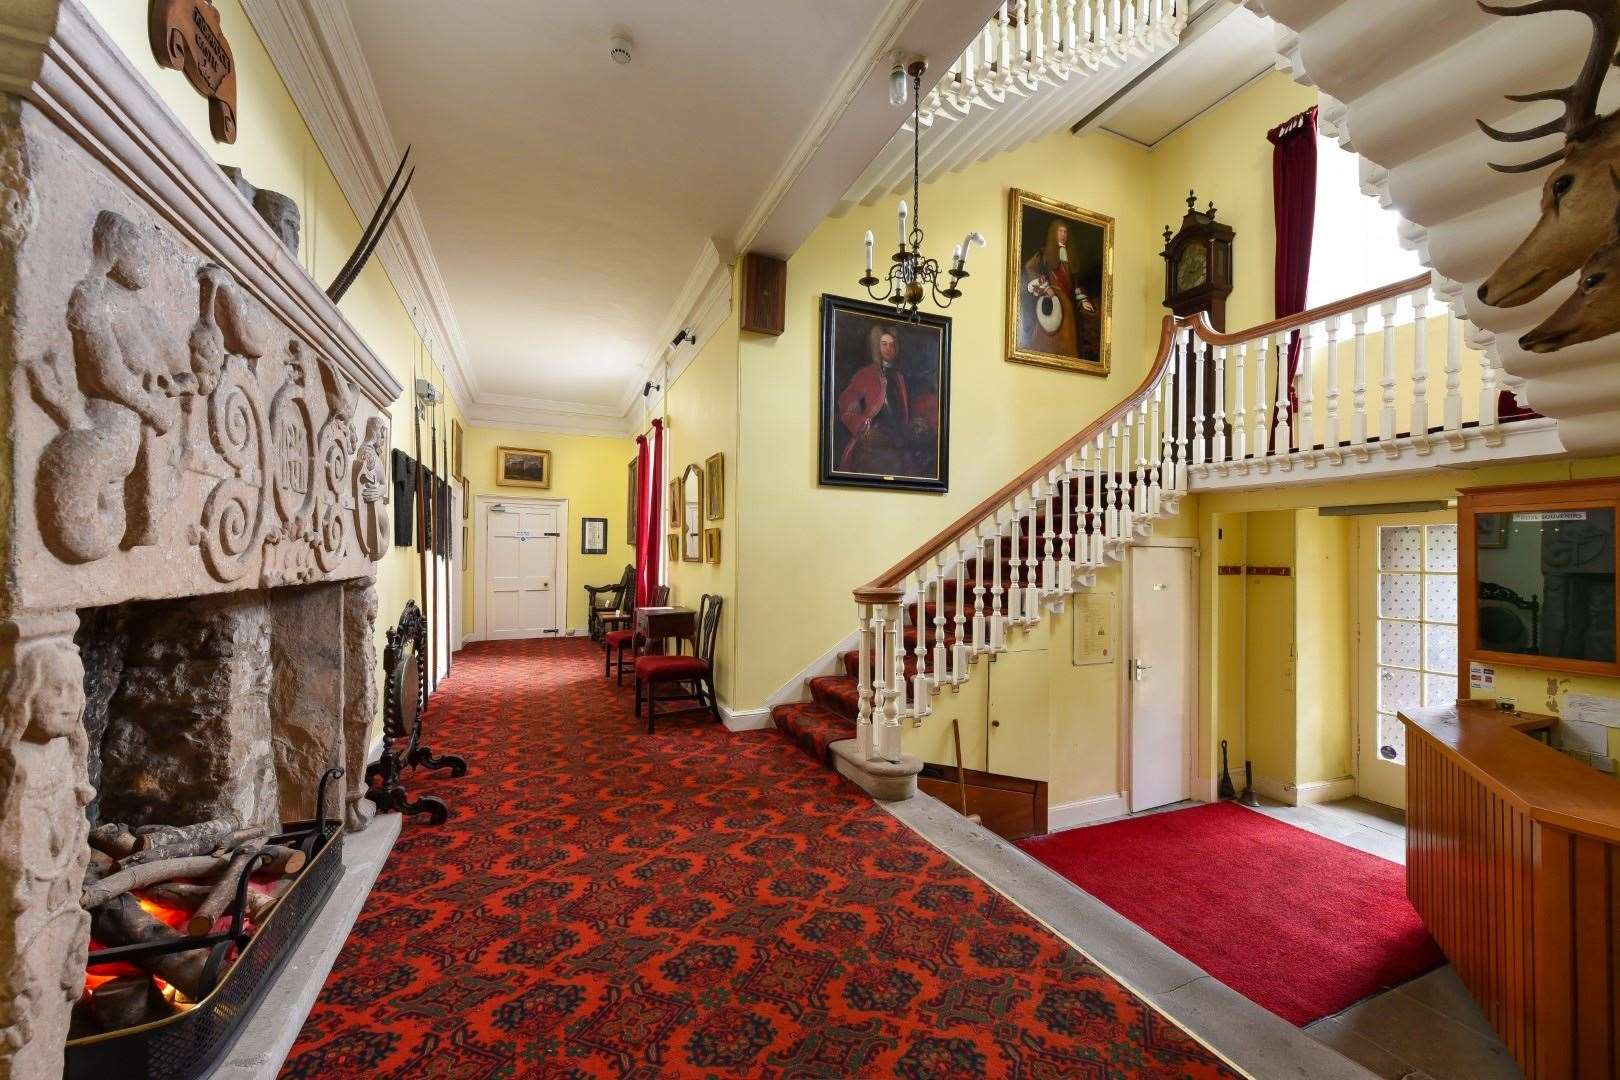 The hall with its imposing stone fireplace greets visitors to Kilravock Castle.